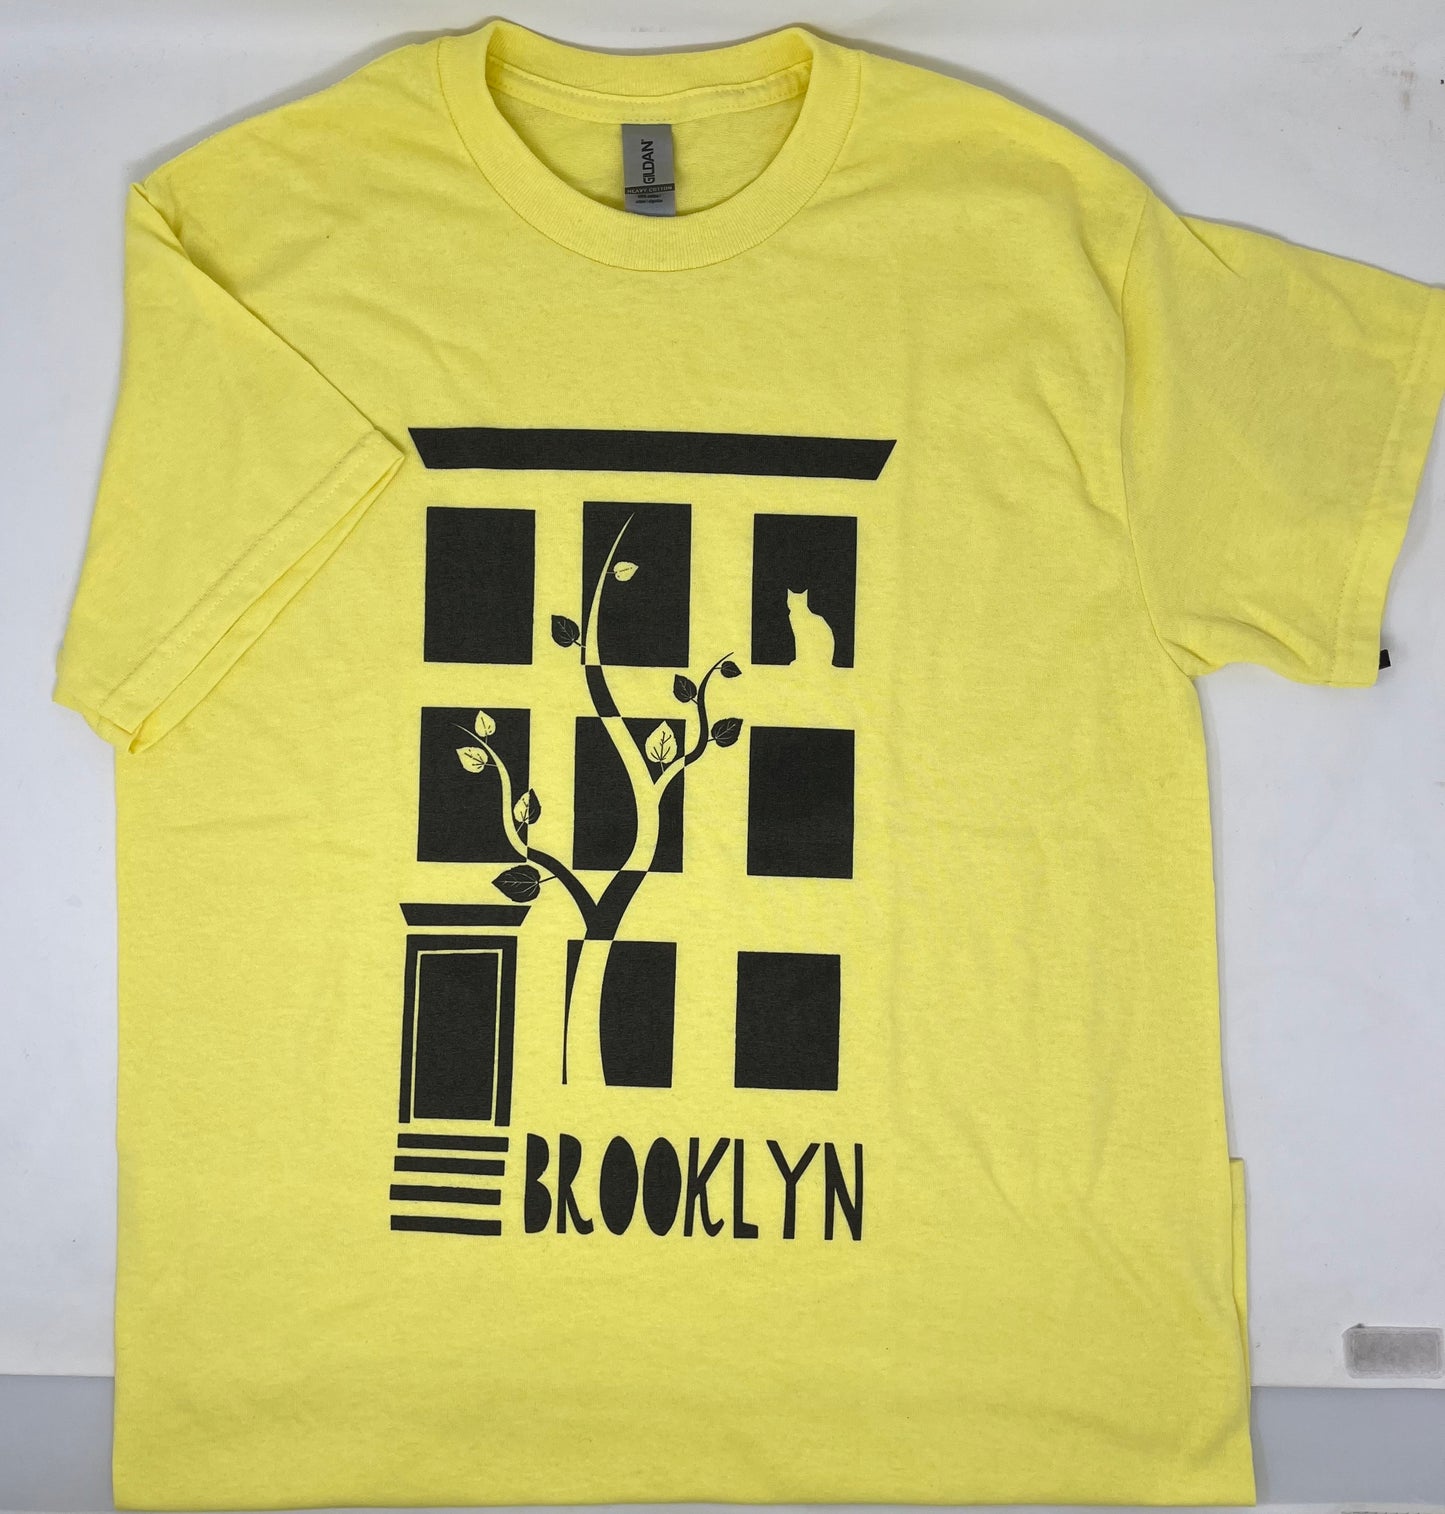 Brownstone Adult T Yellow Size M